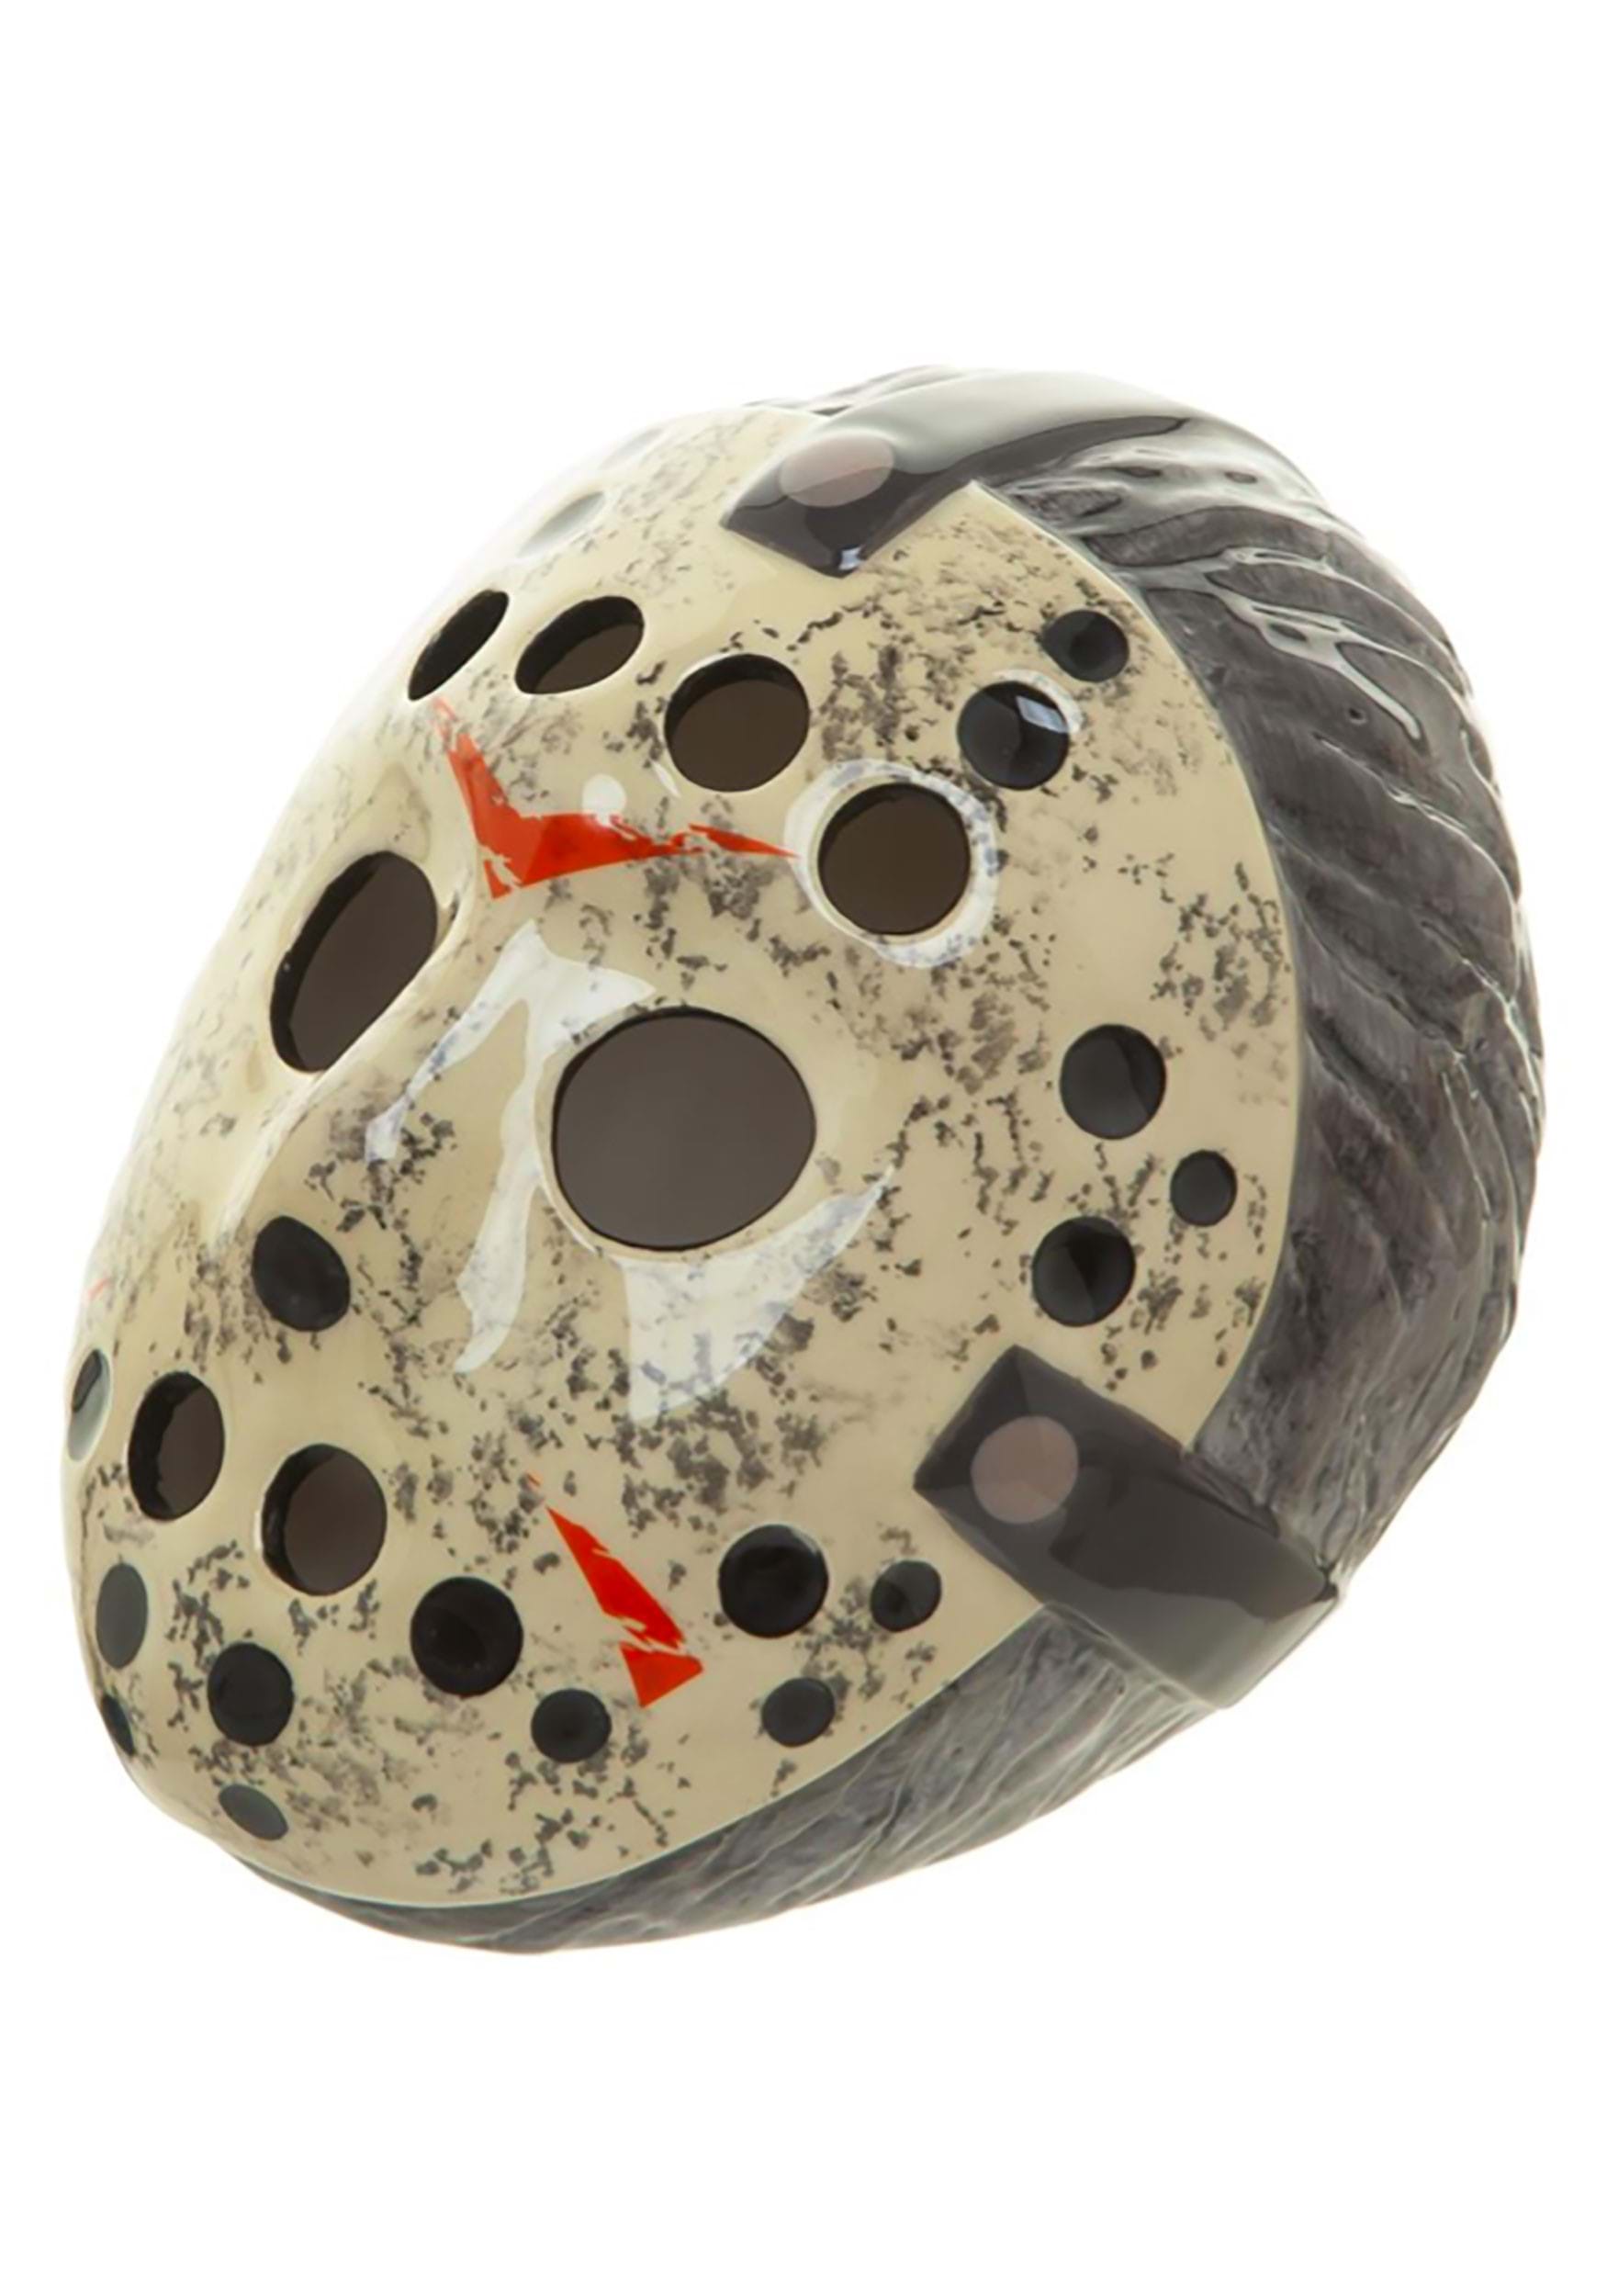 Friday The 13th Ceramic Pencil Holder , Horror Movie Collectibles